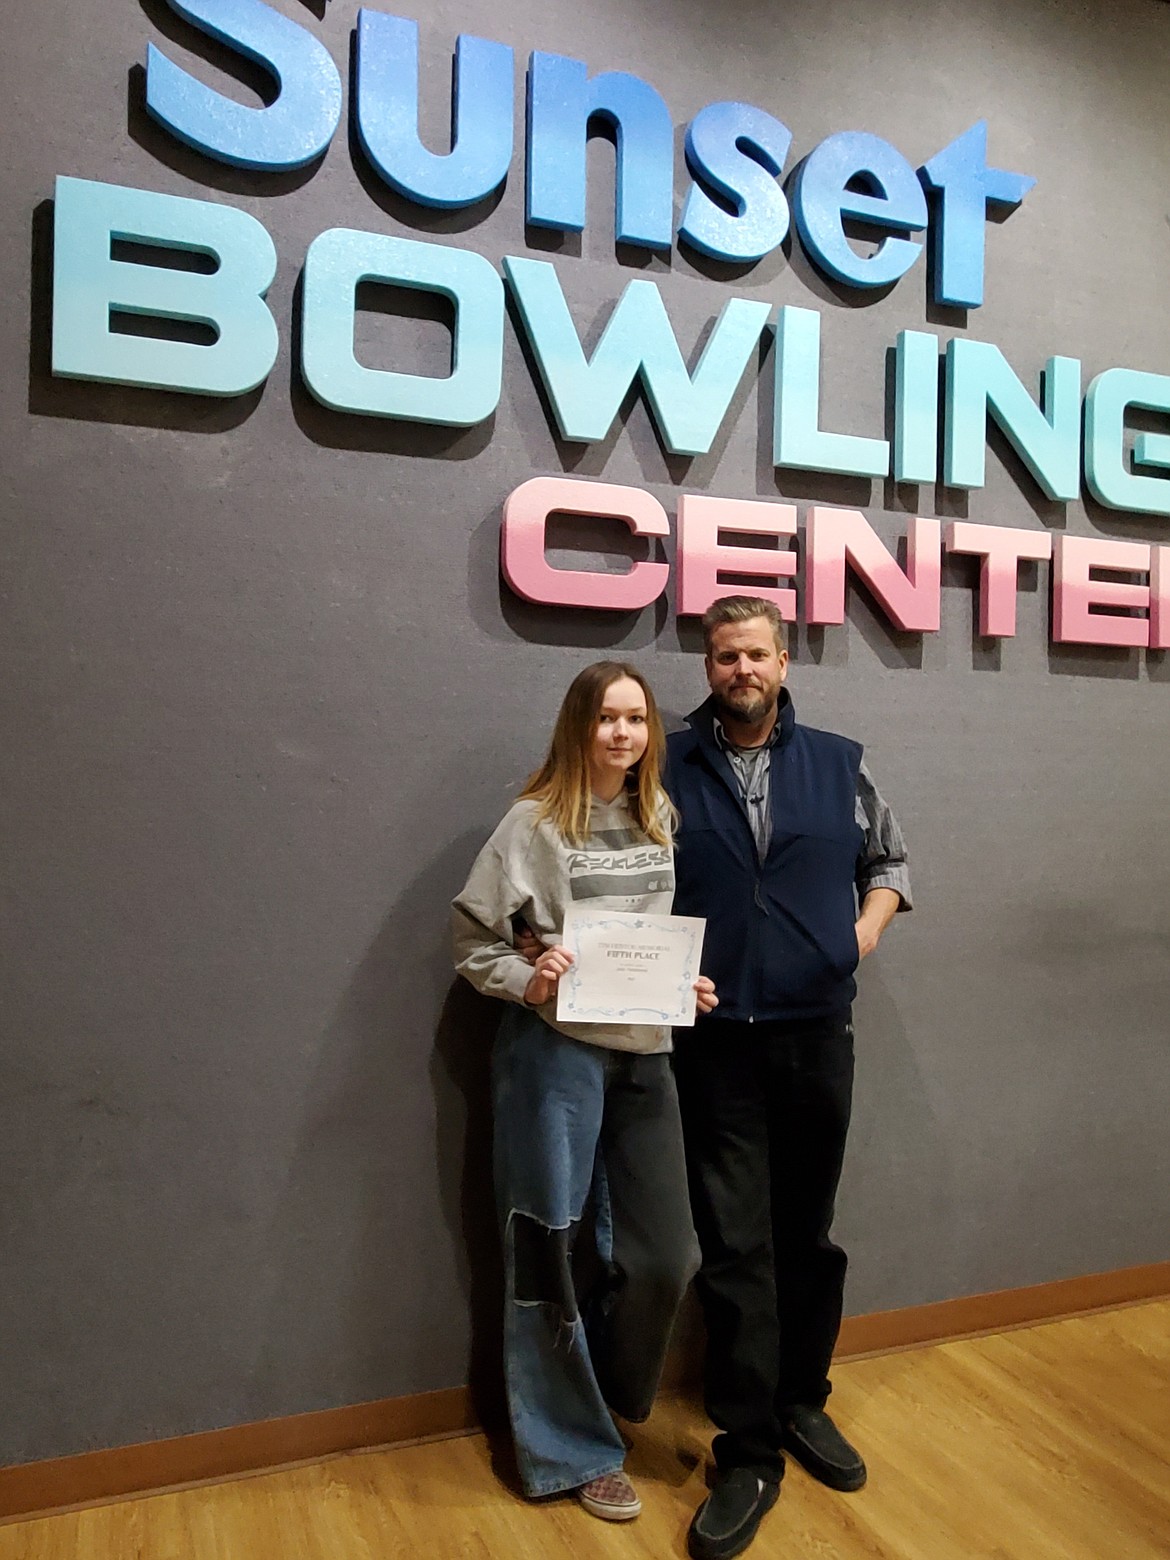 Courtesy photo
The 7th annual Tim Fristoe Youth/Adult Tournament took place Sunday at Sunset Bowling Center in Coeur d'Alene. Fifth place went to Jody Hammond Jr., left, and Jody Hammond Sr. Jody Hammond Jr. earned a $50 scholarship.